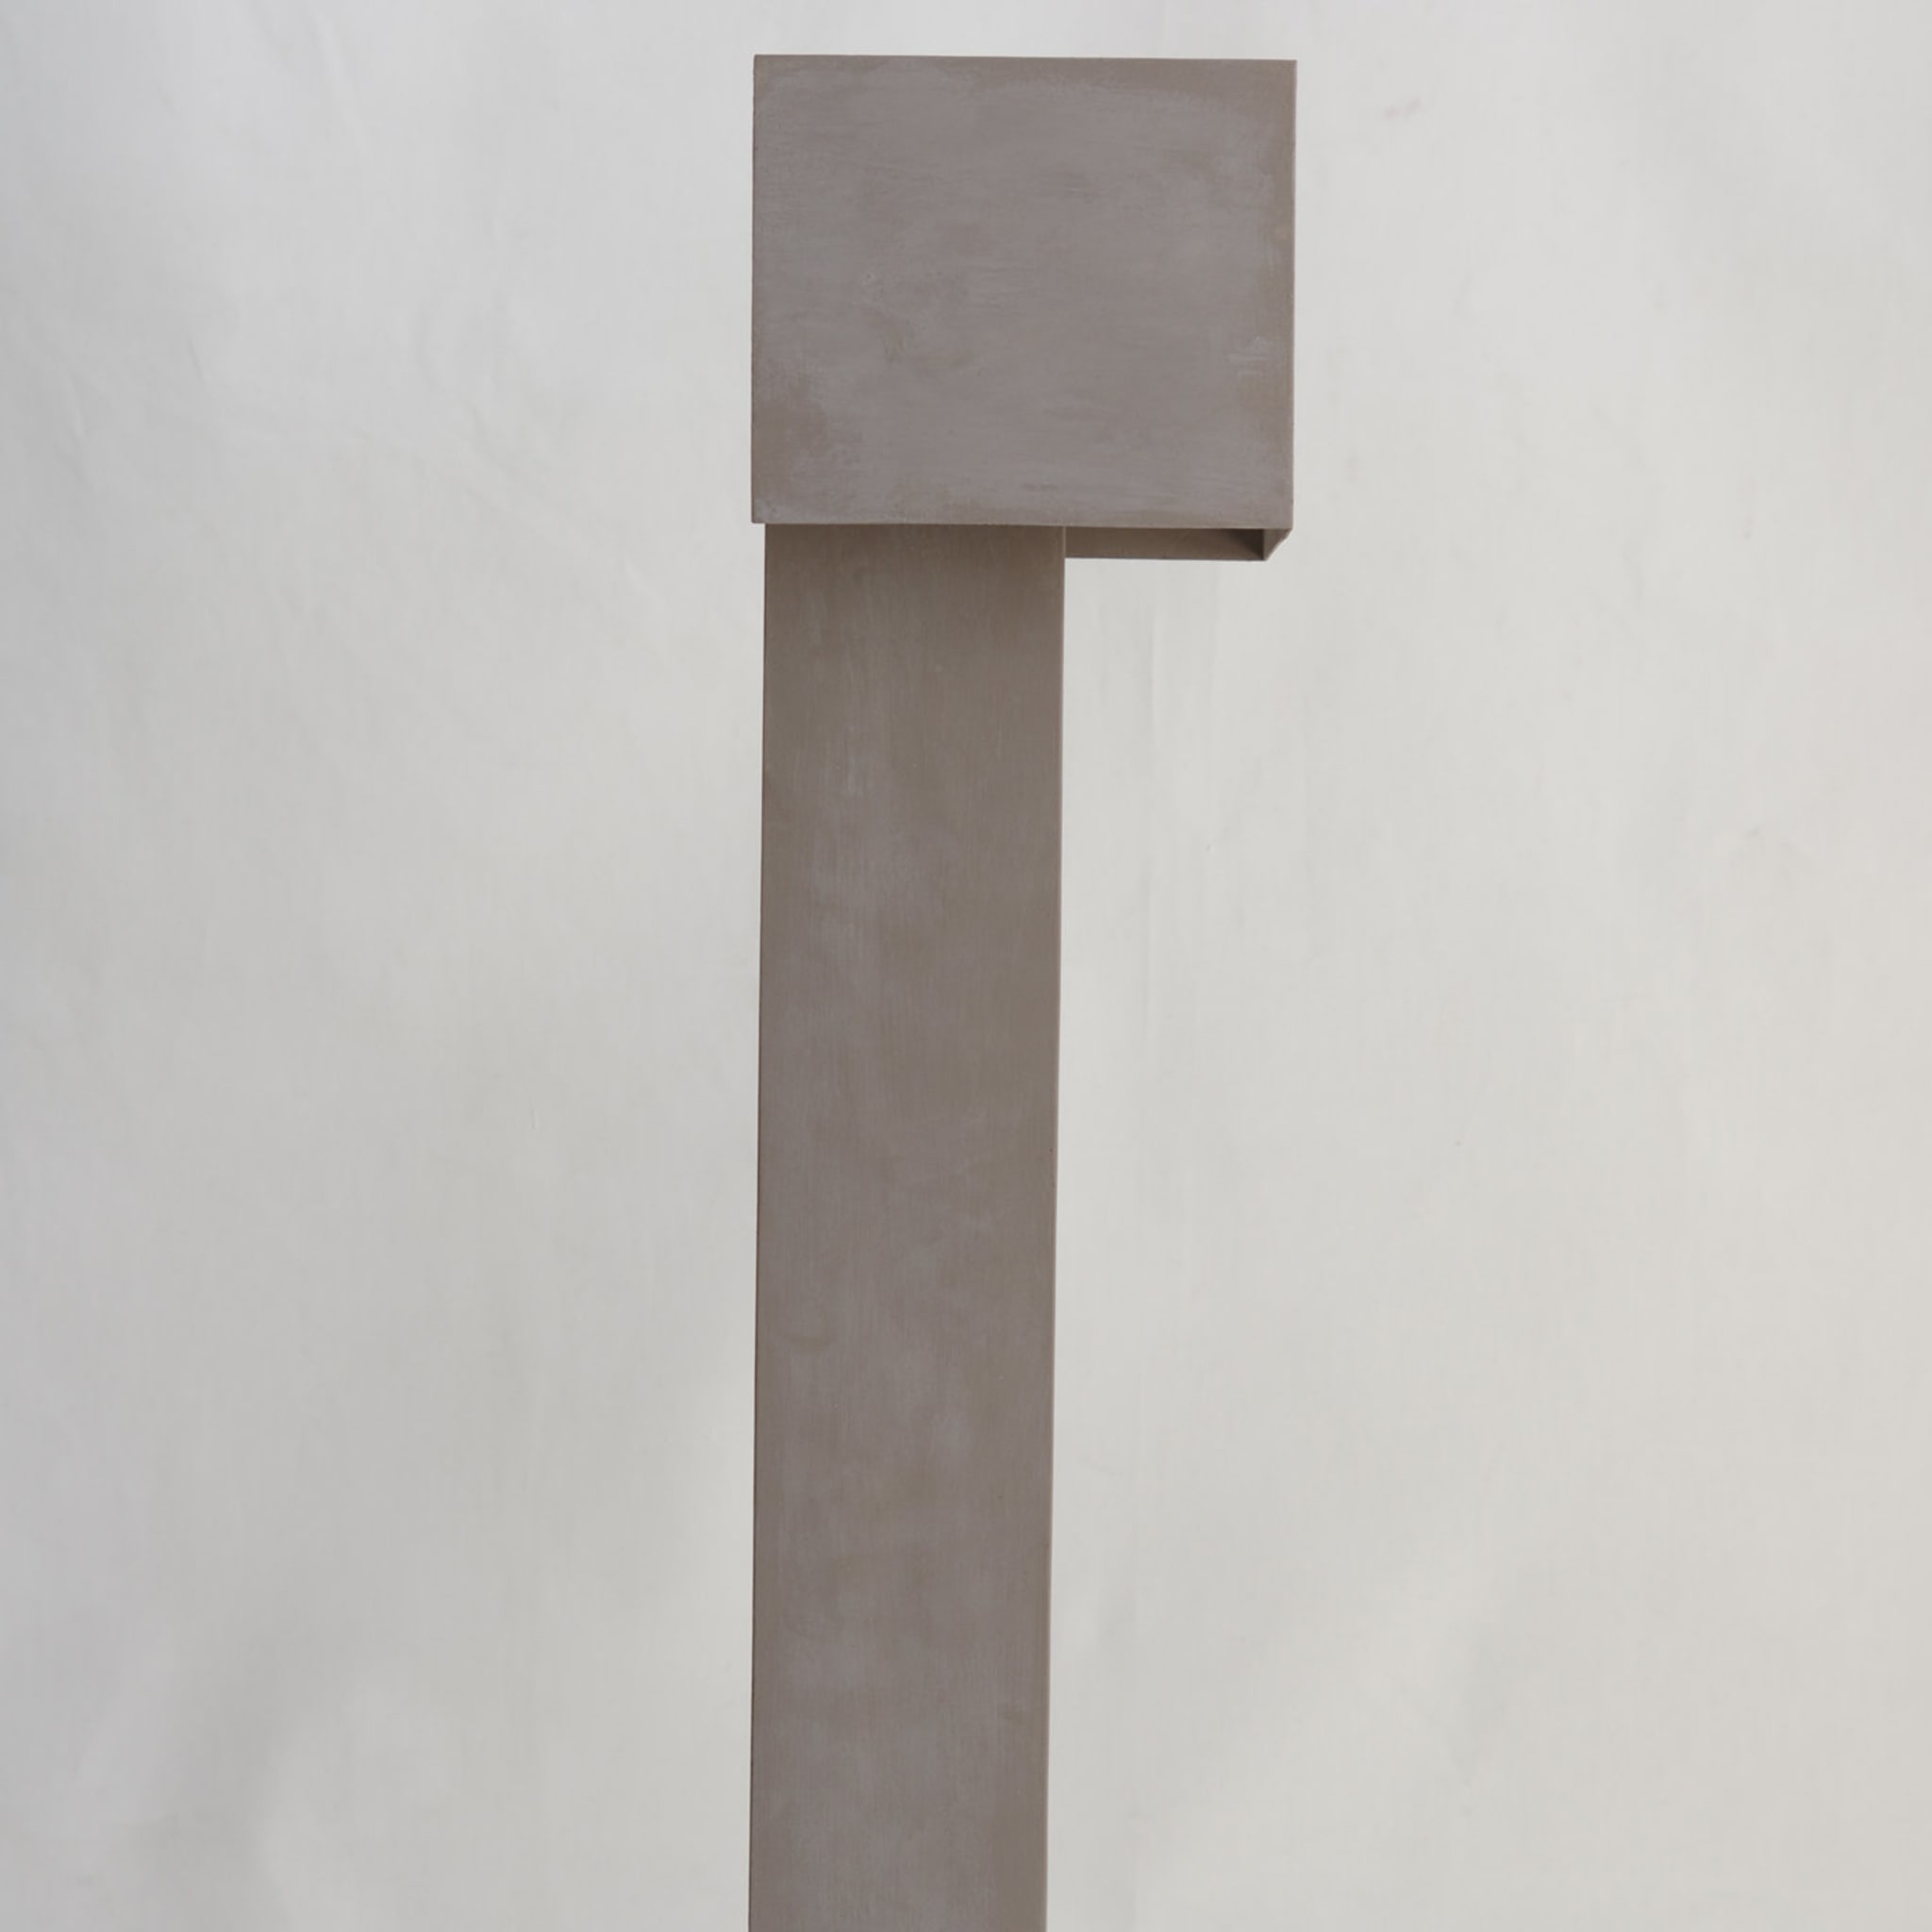 Two Towers Light-Sculpture - Alternative view 4